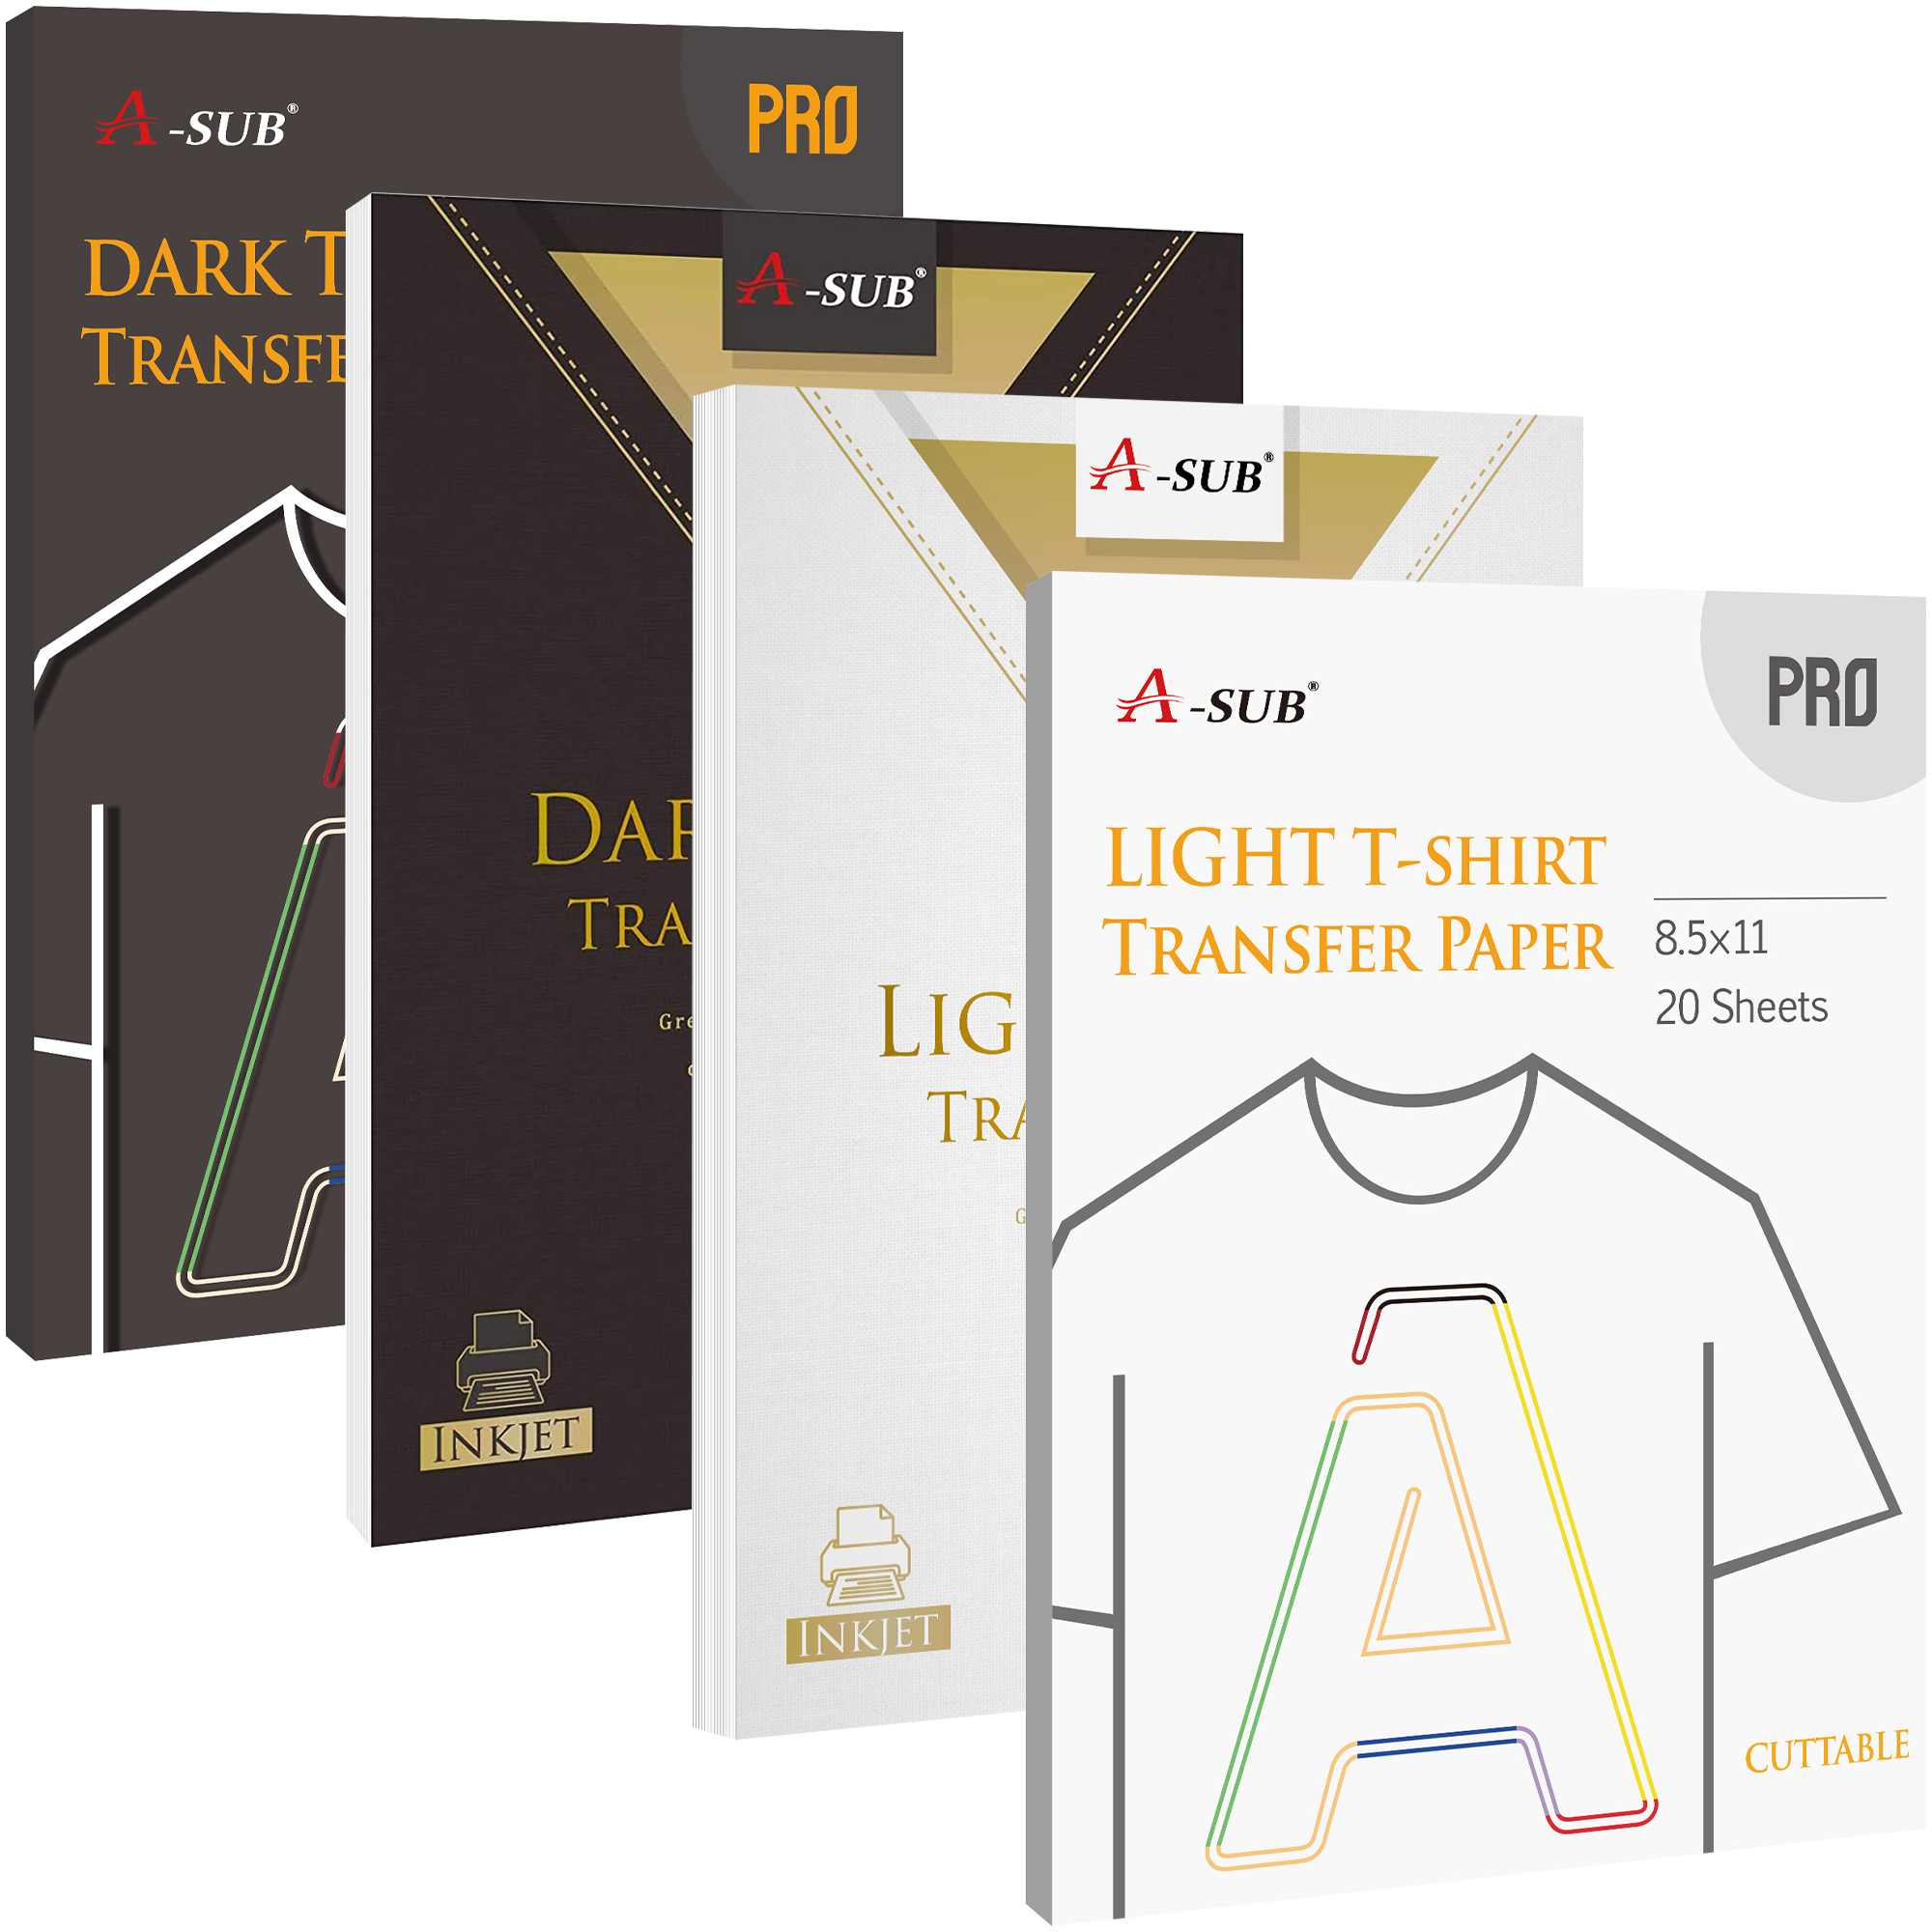 Lot 20-100 A-sub Inkjet Printable Iron on Heat Transfer Paper for